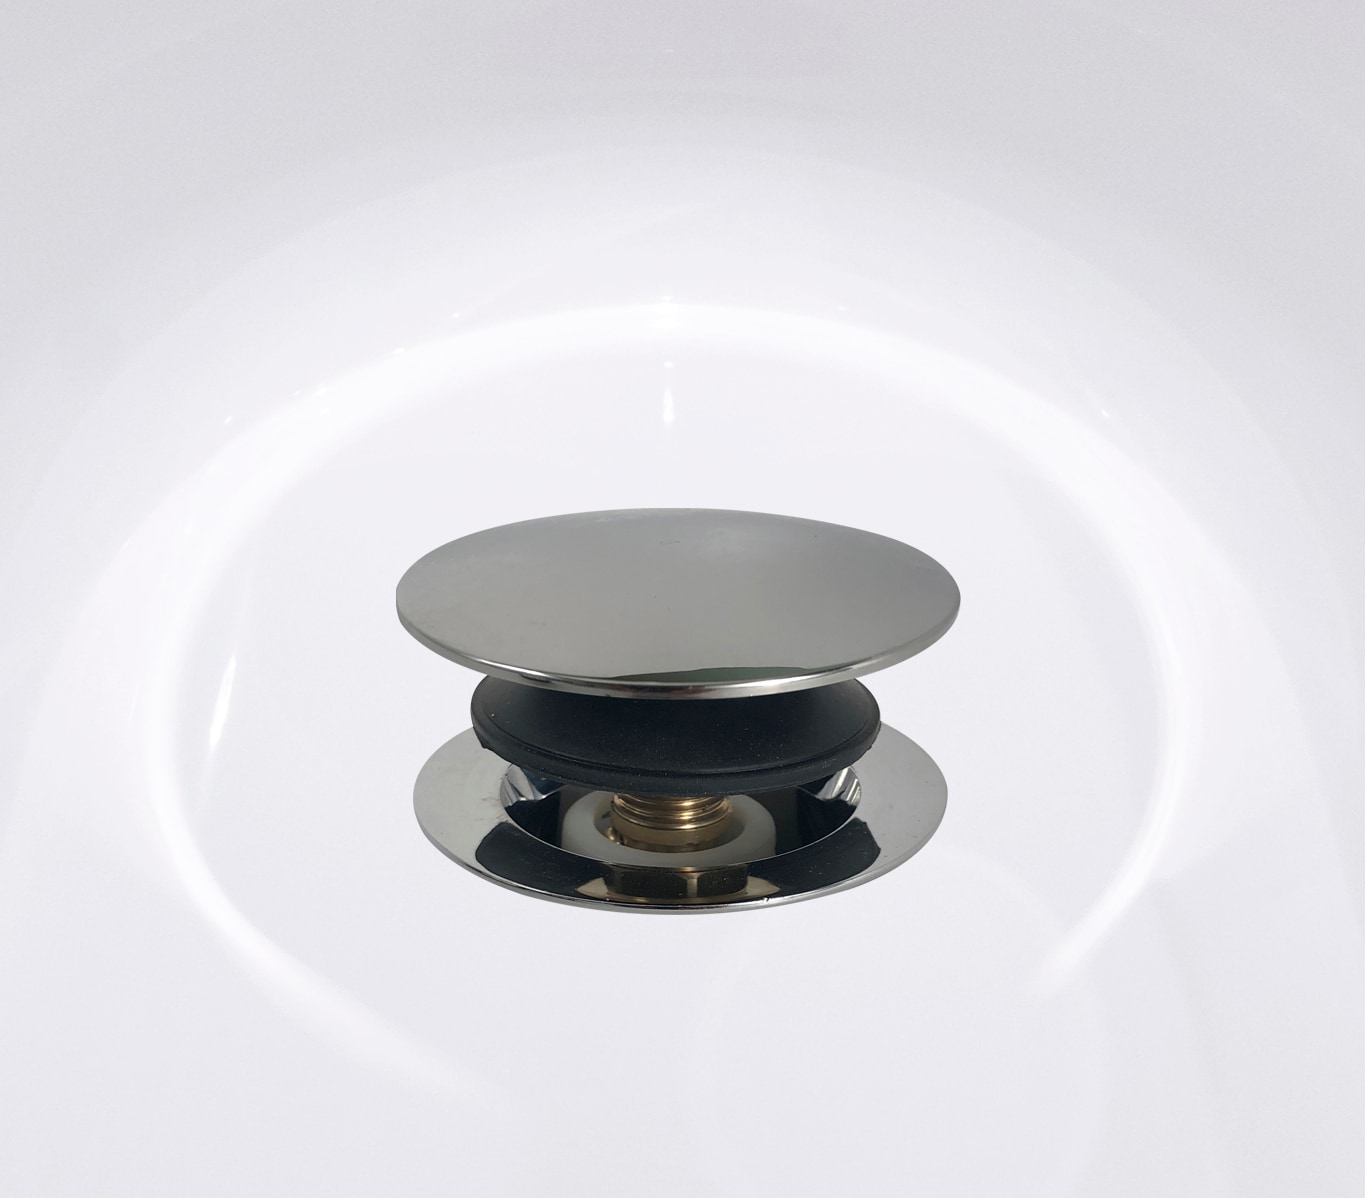 TubSTRAIN ToeTouch Bathtub Drain Stopper With Fittings and Haircatcher - Tub  And Shower Parts - by PF WaterWorks